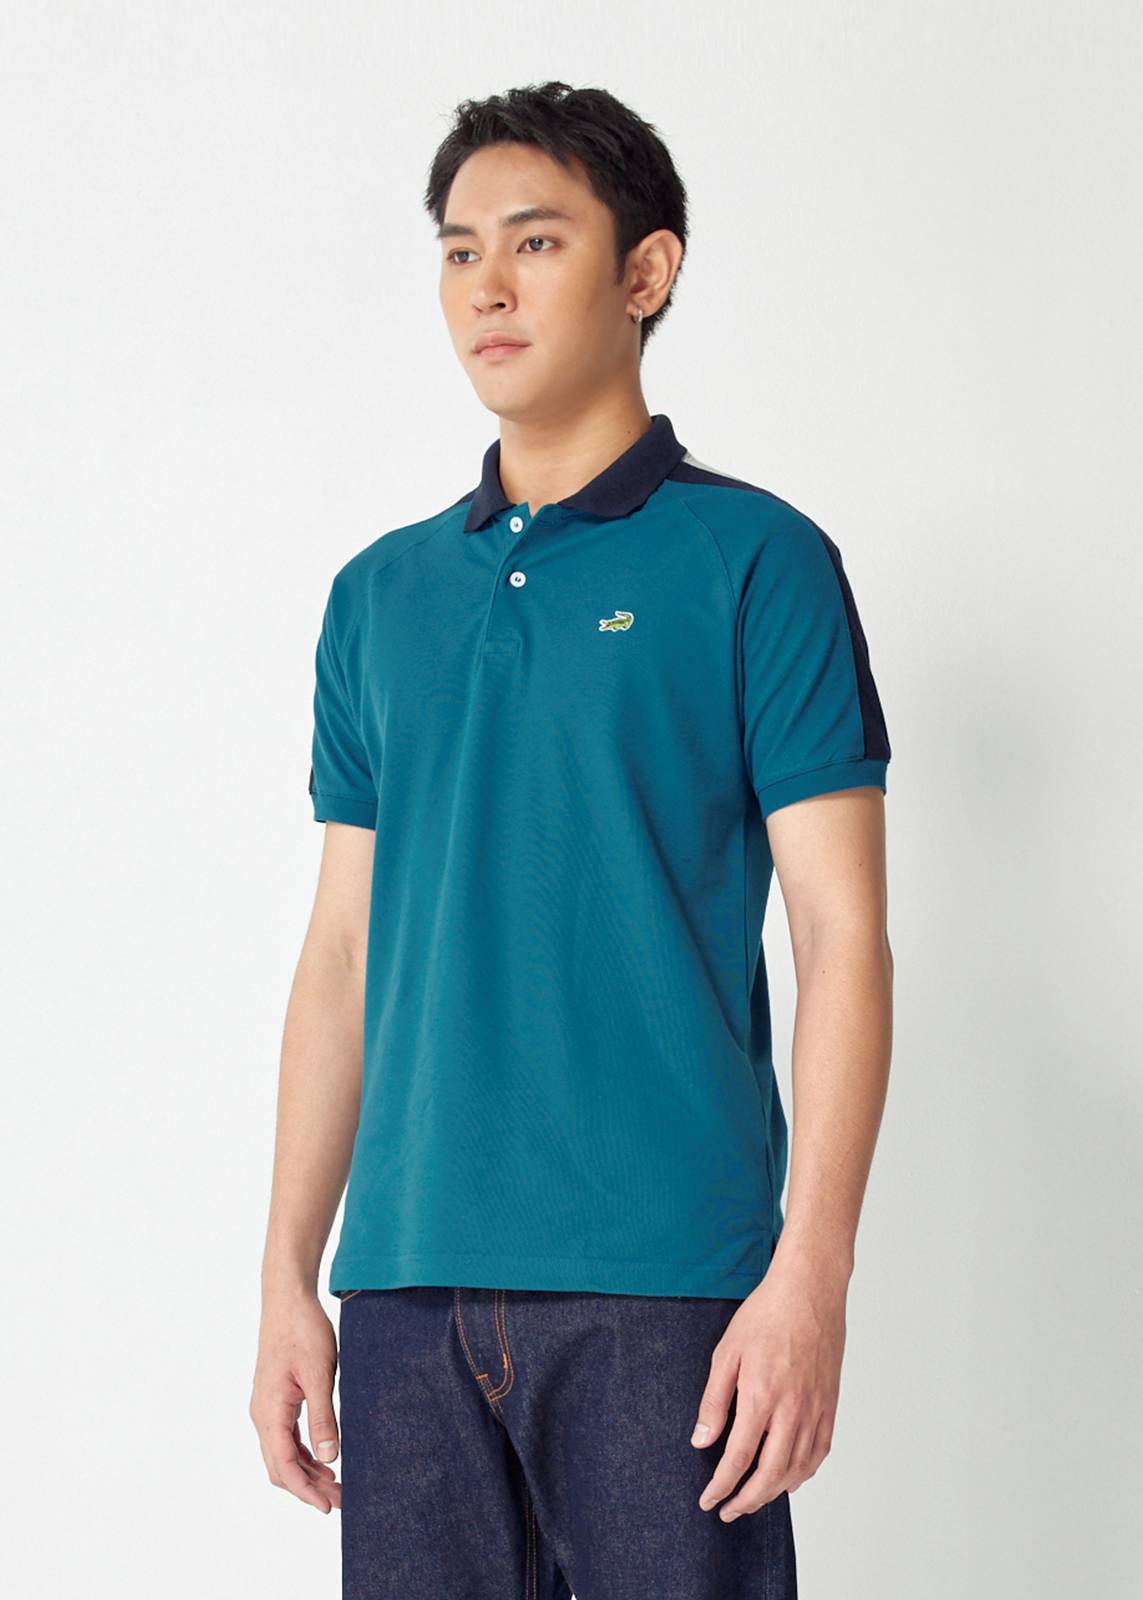 MARINE TEAL GREEN CUSTOM FIT WITH COLOUR BLOCK POLO SHIRT